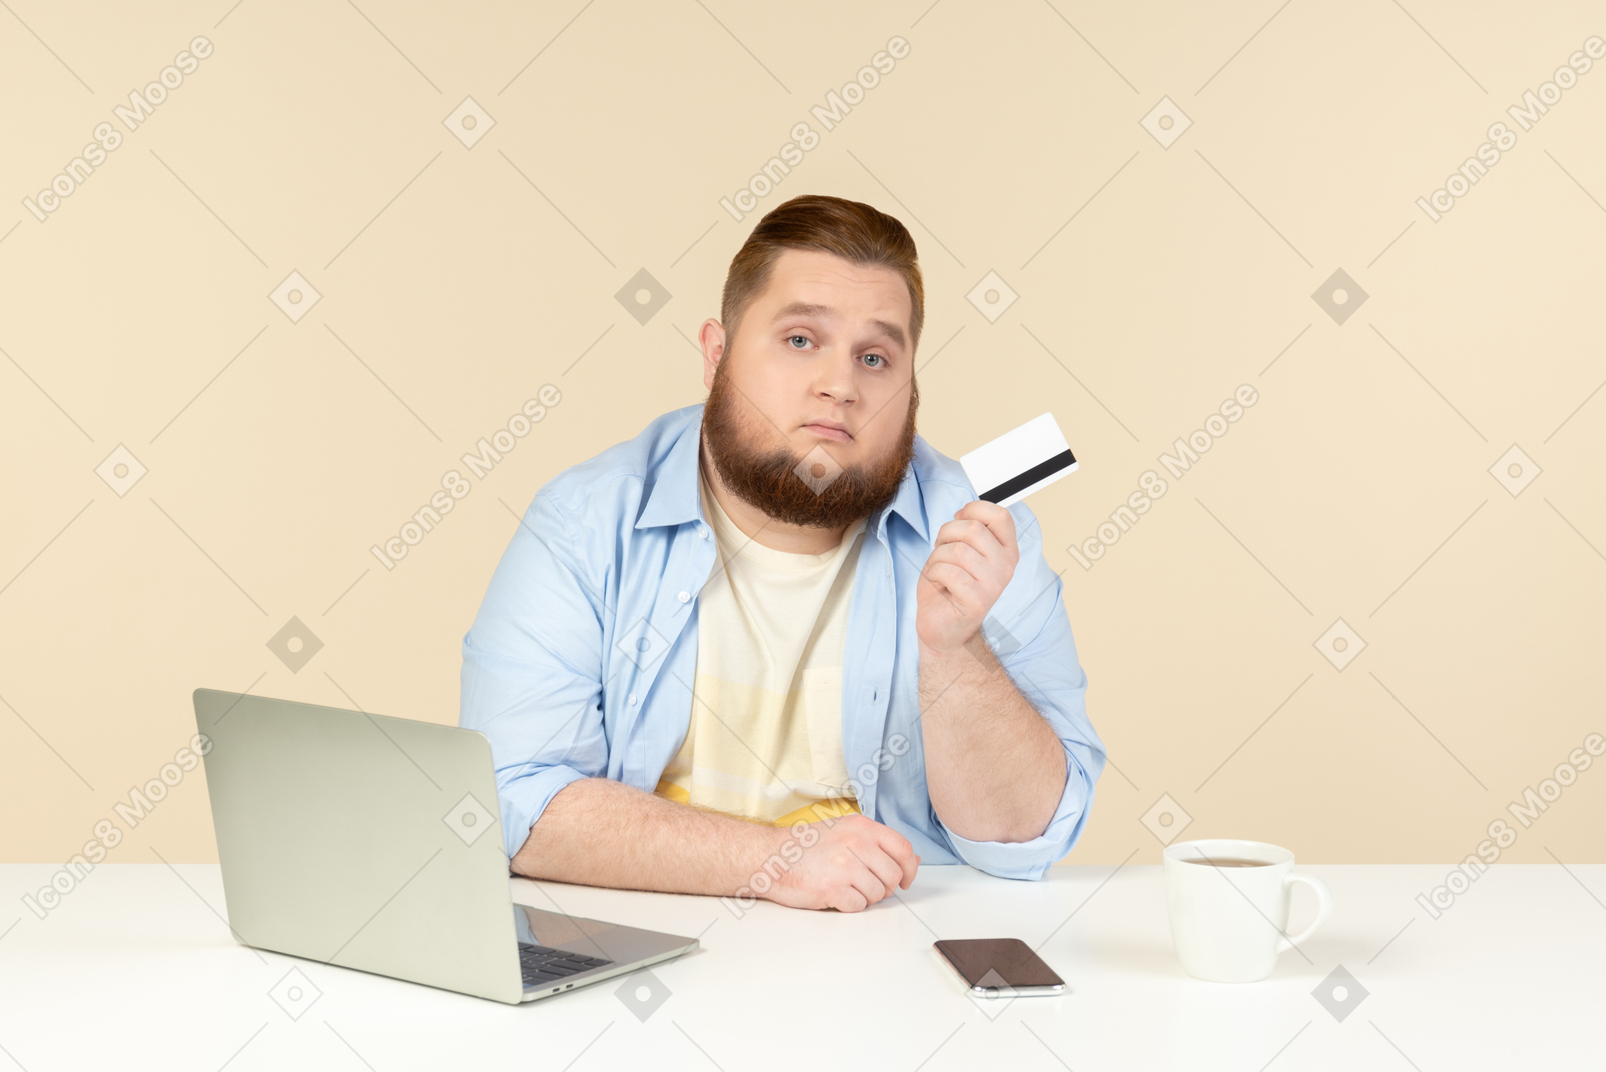 Young overweight man sitting at the table, holding phone and looking at bank card